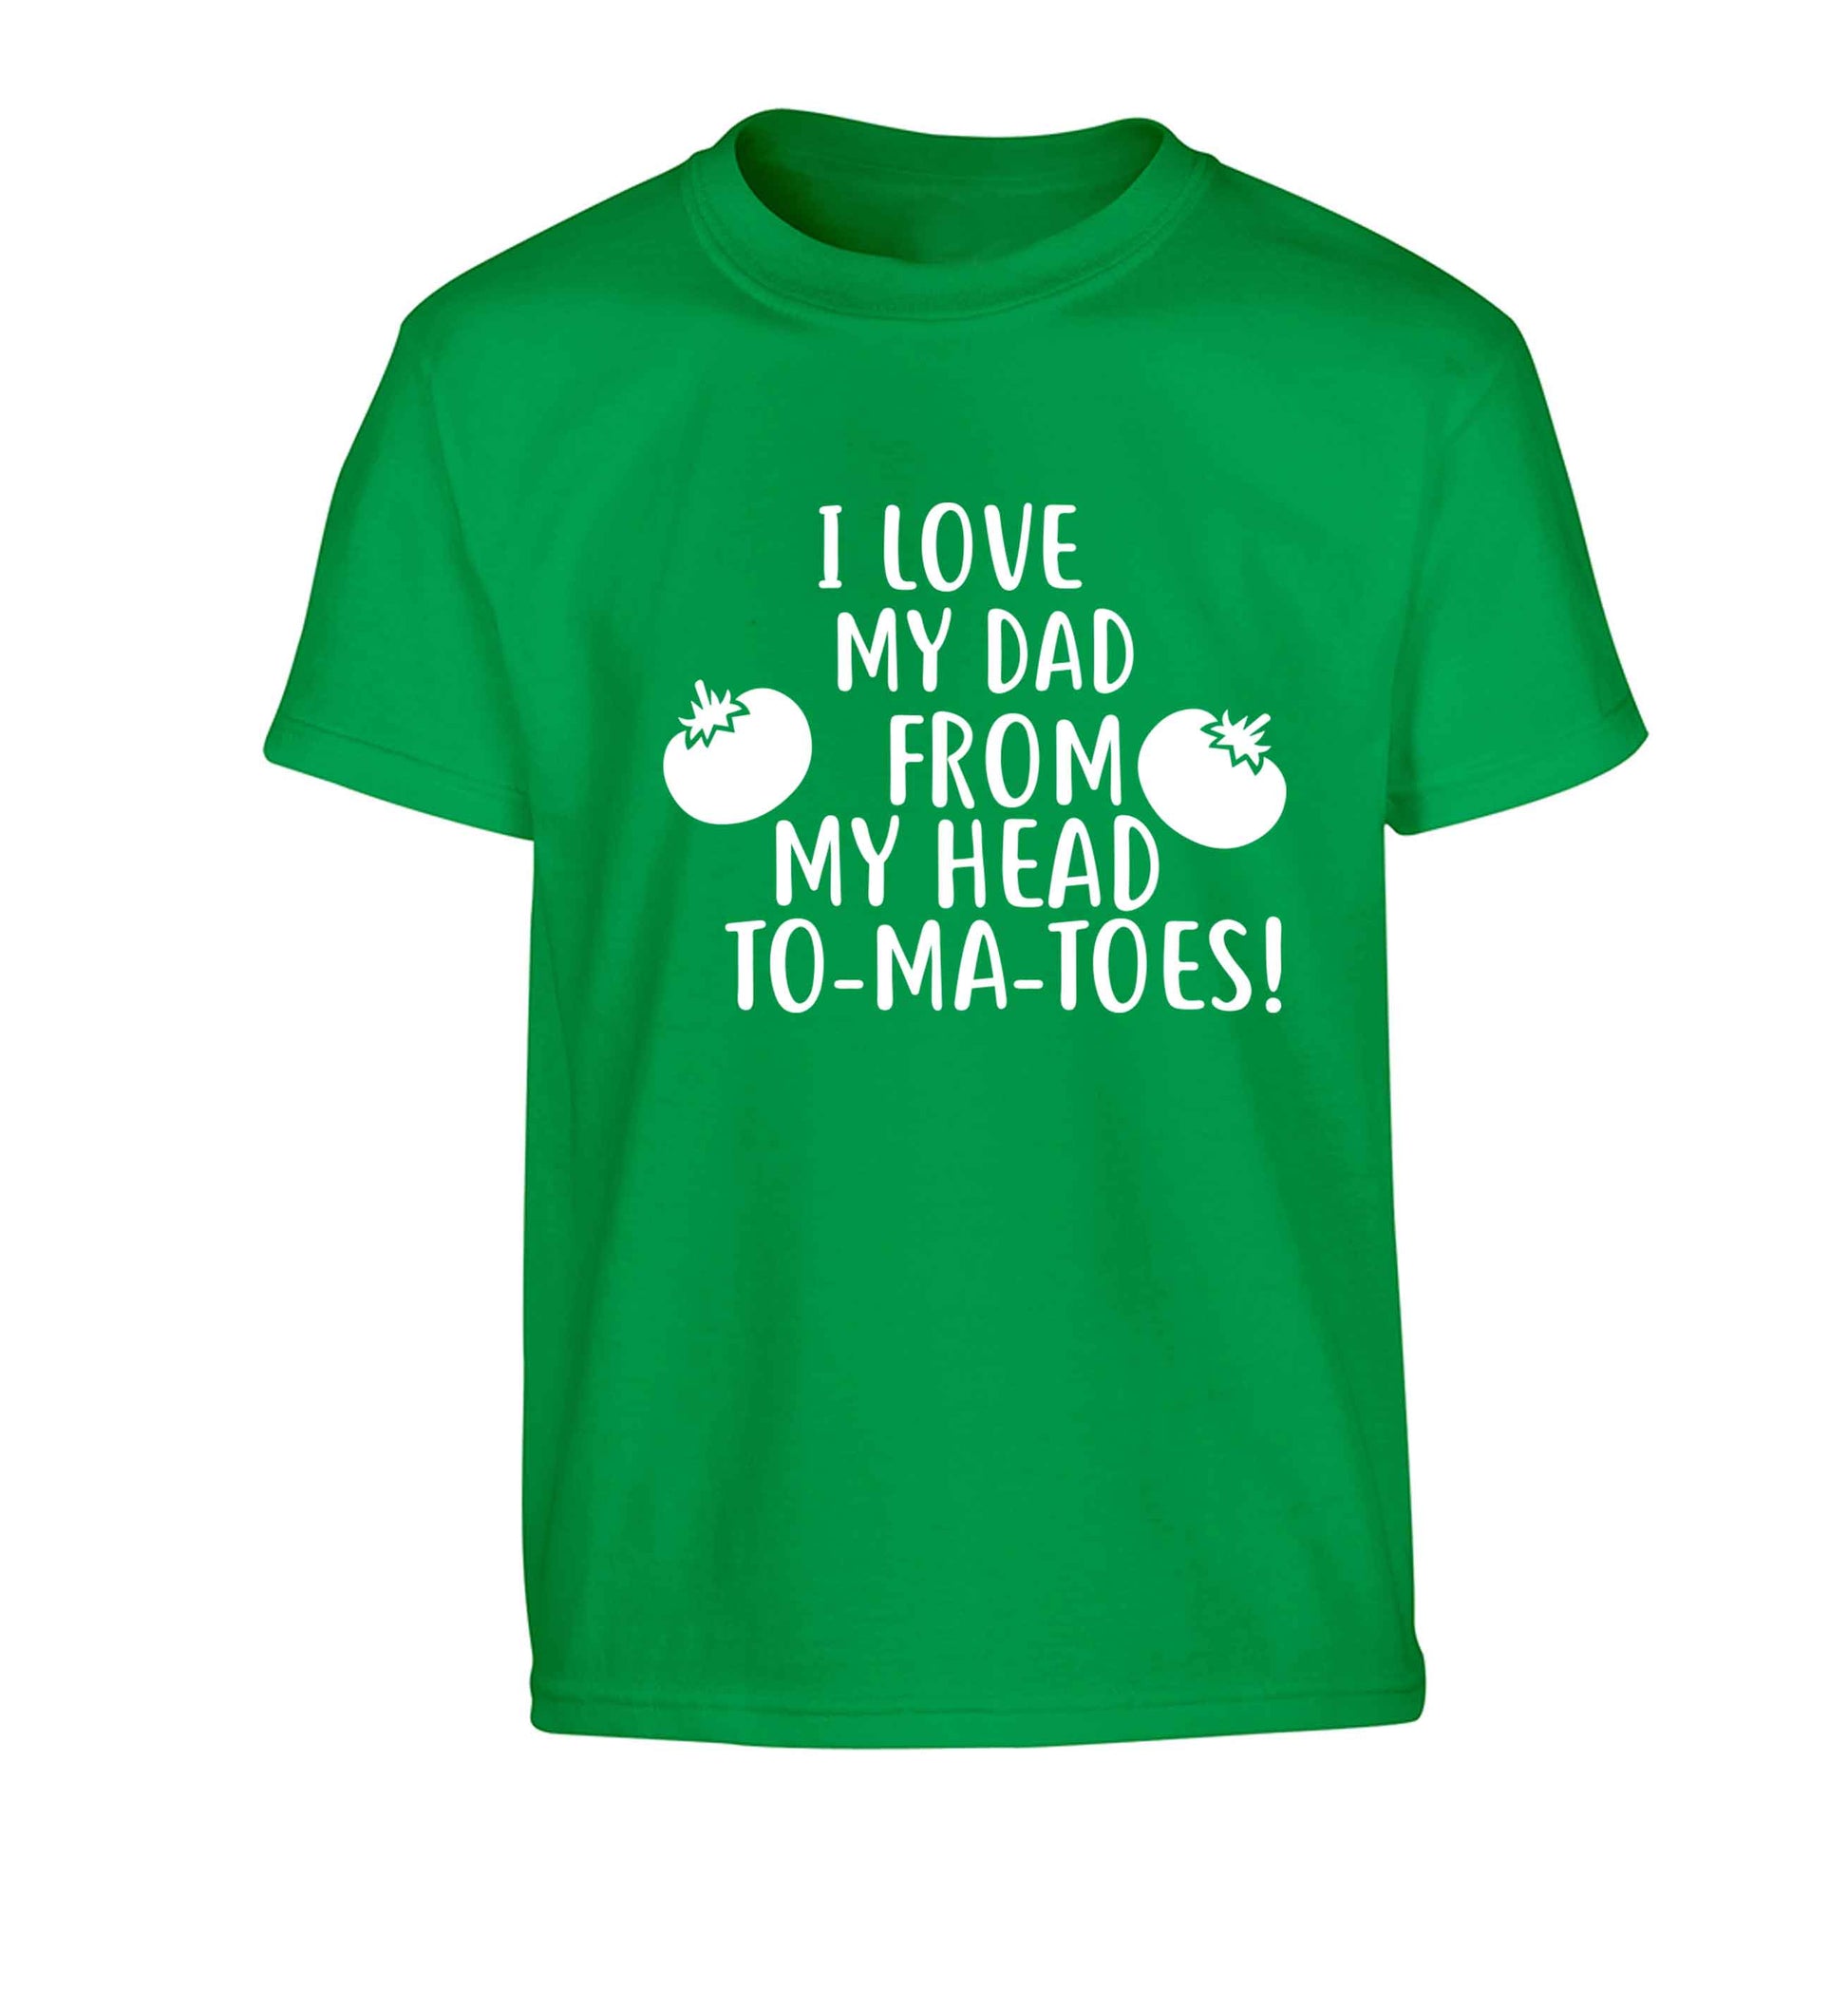 I love my dad from my head to-ma-toes Children's green Tshirt 12-13 Years